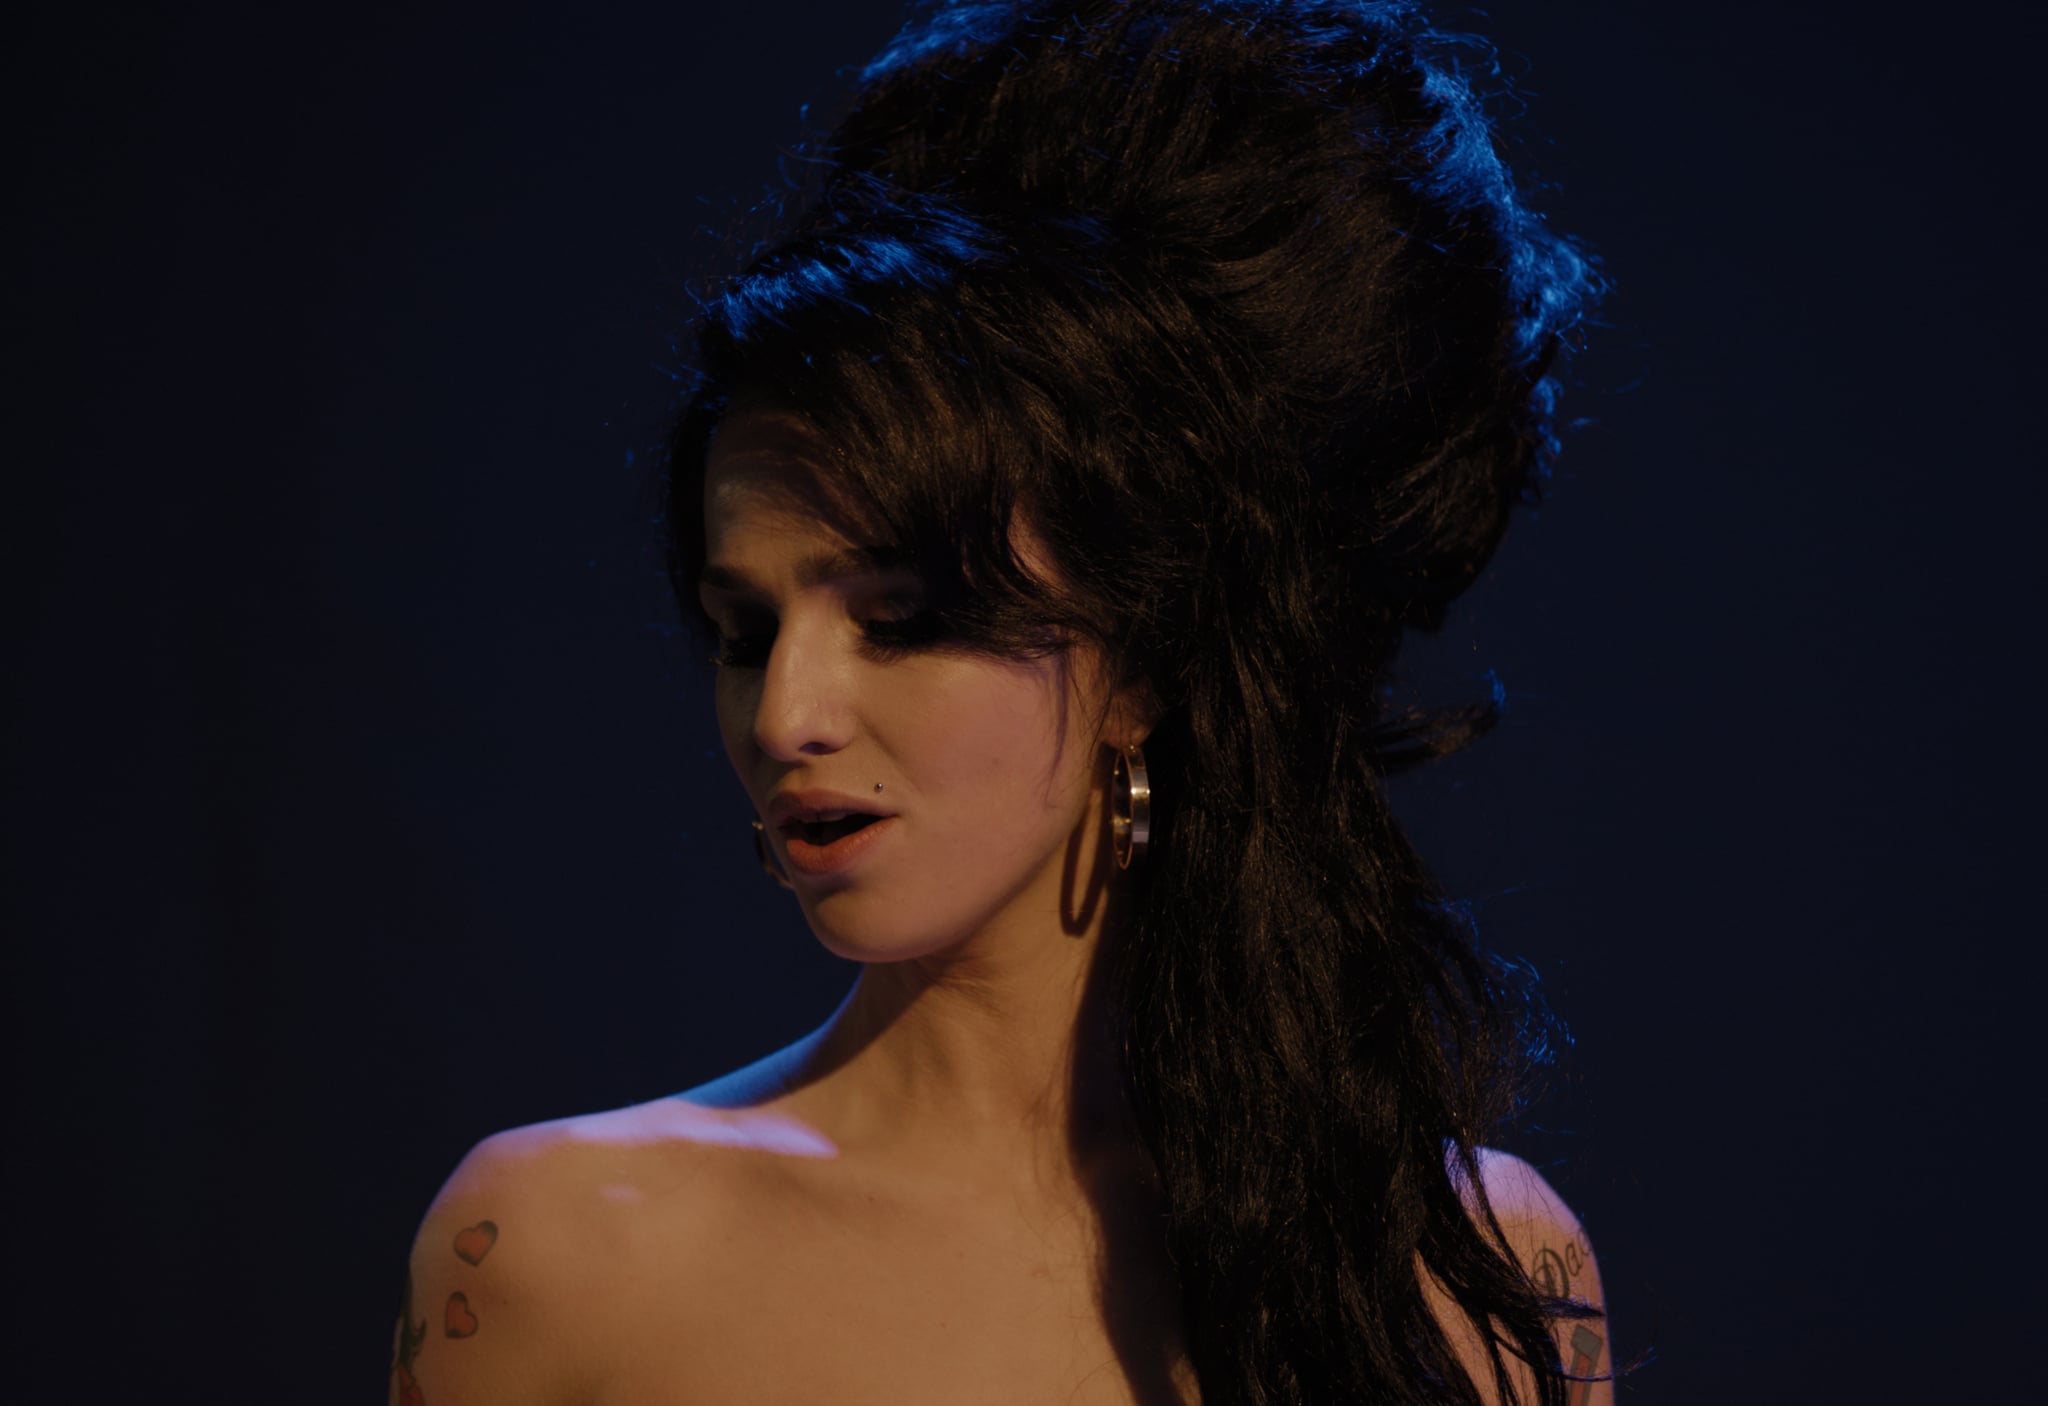 Marisa Abela stars as Amy Winehouse in director Sam Taylor-Johnson's BACK TO BLACK, a Focus Features release. Credit : Focus Features